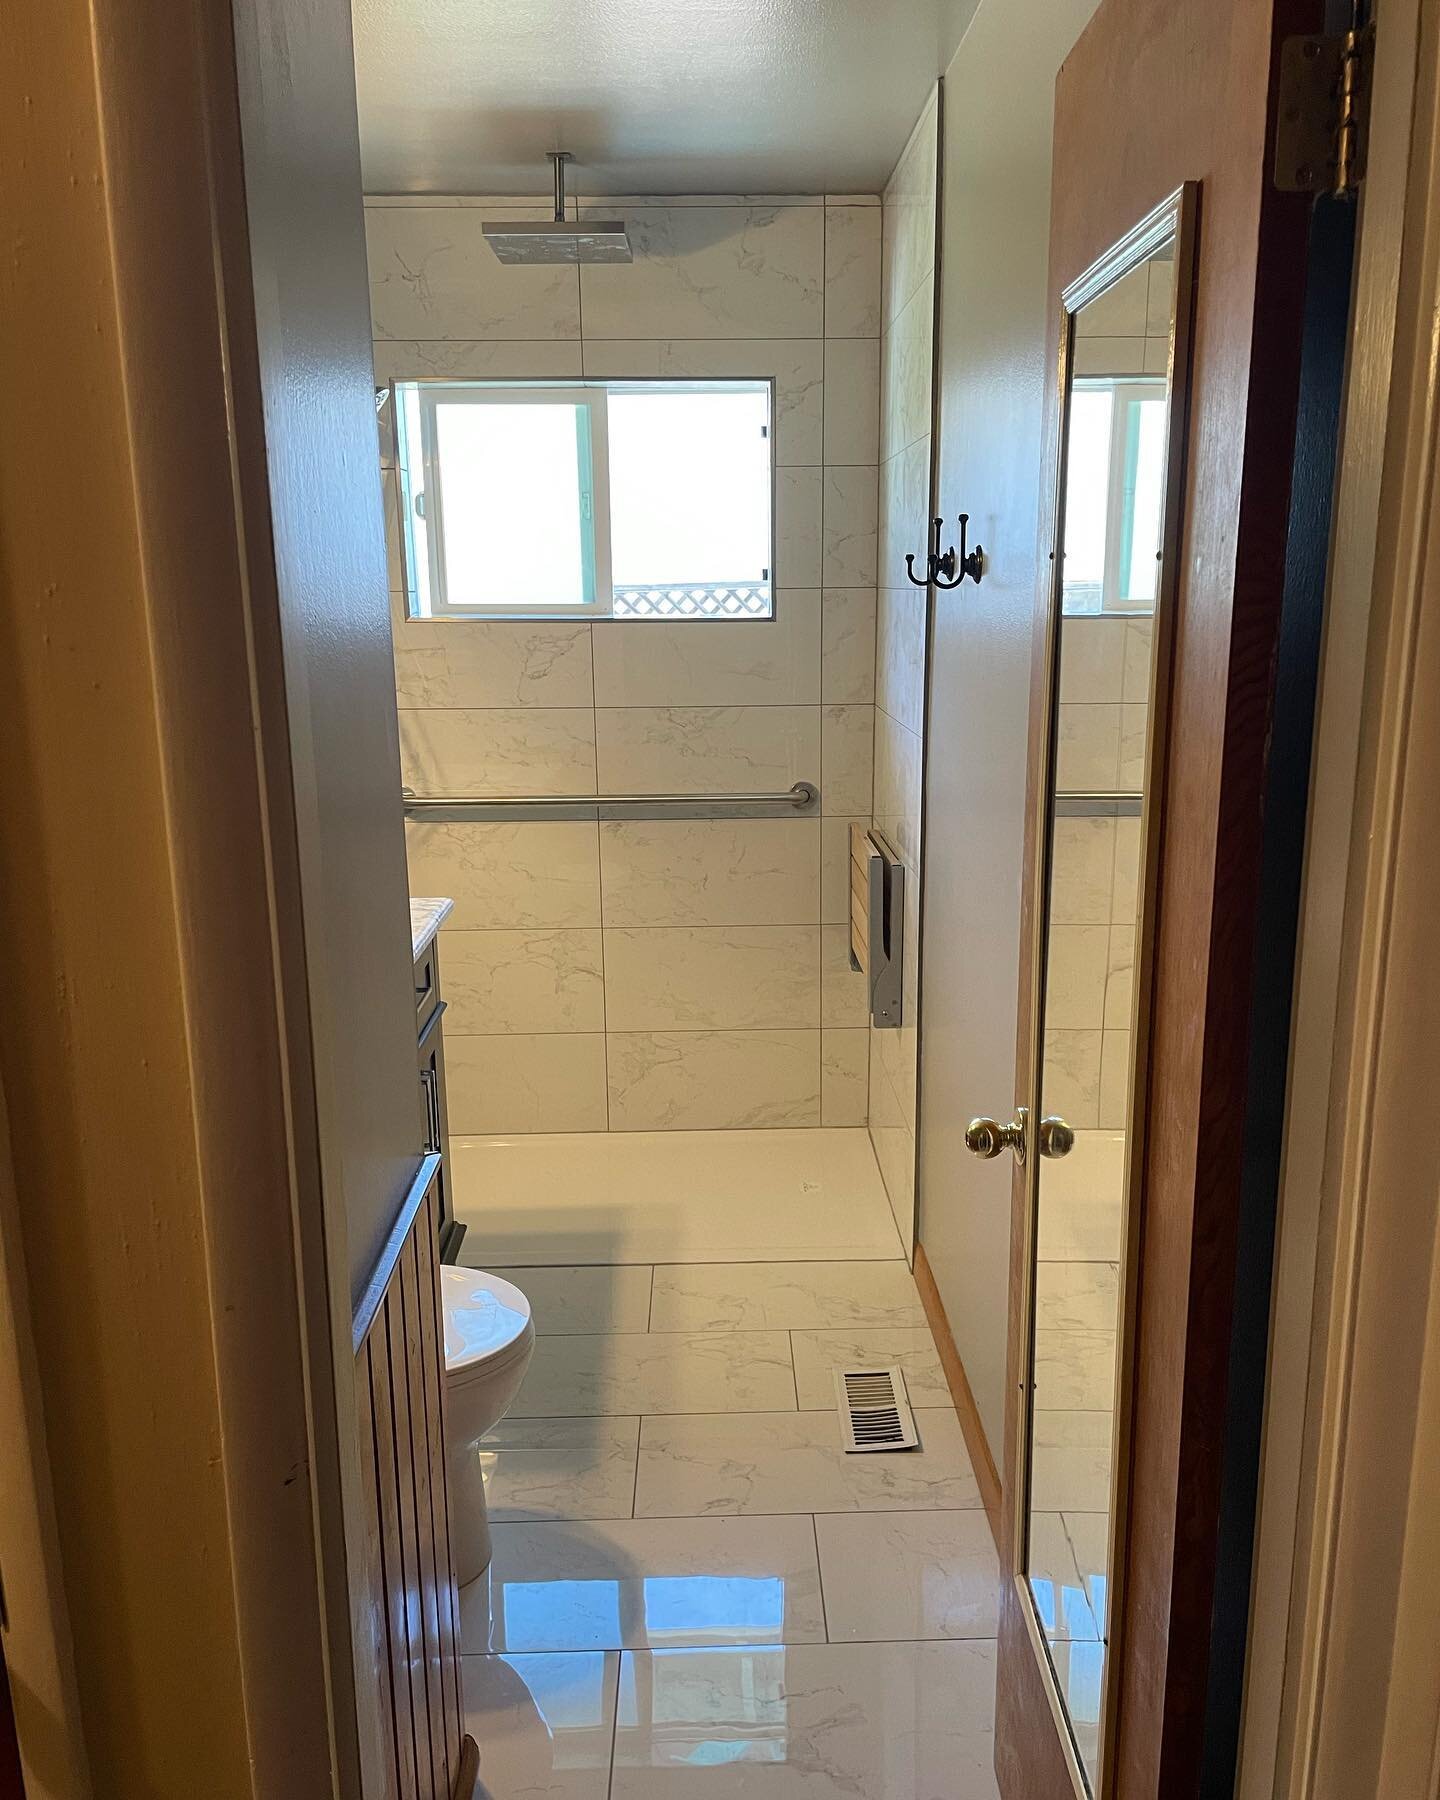 Anyone in need of a bathroom remodel? Check out these epic before and afters for inspiration and feel free to message us for a free estimate!